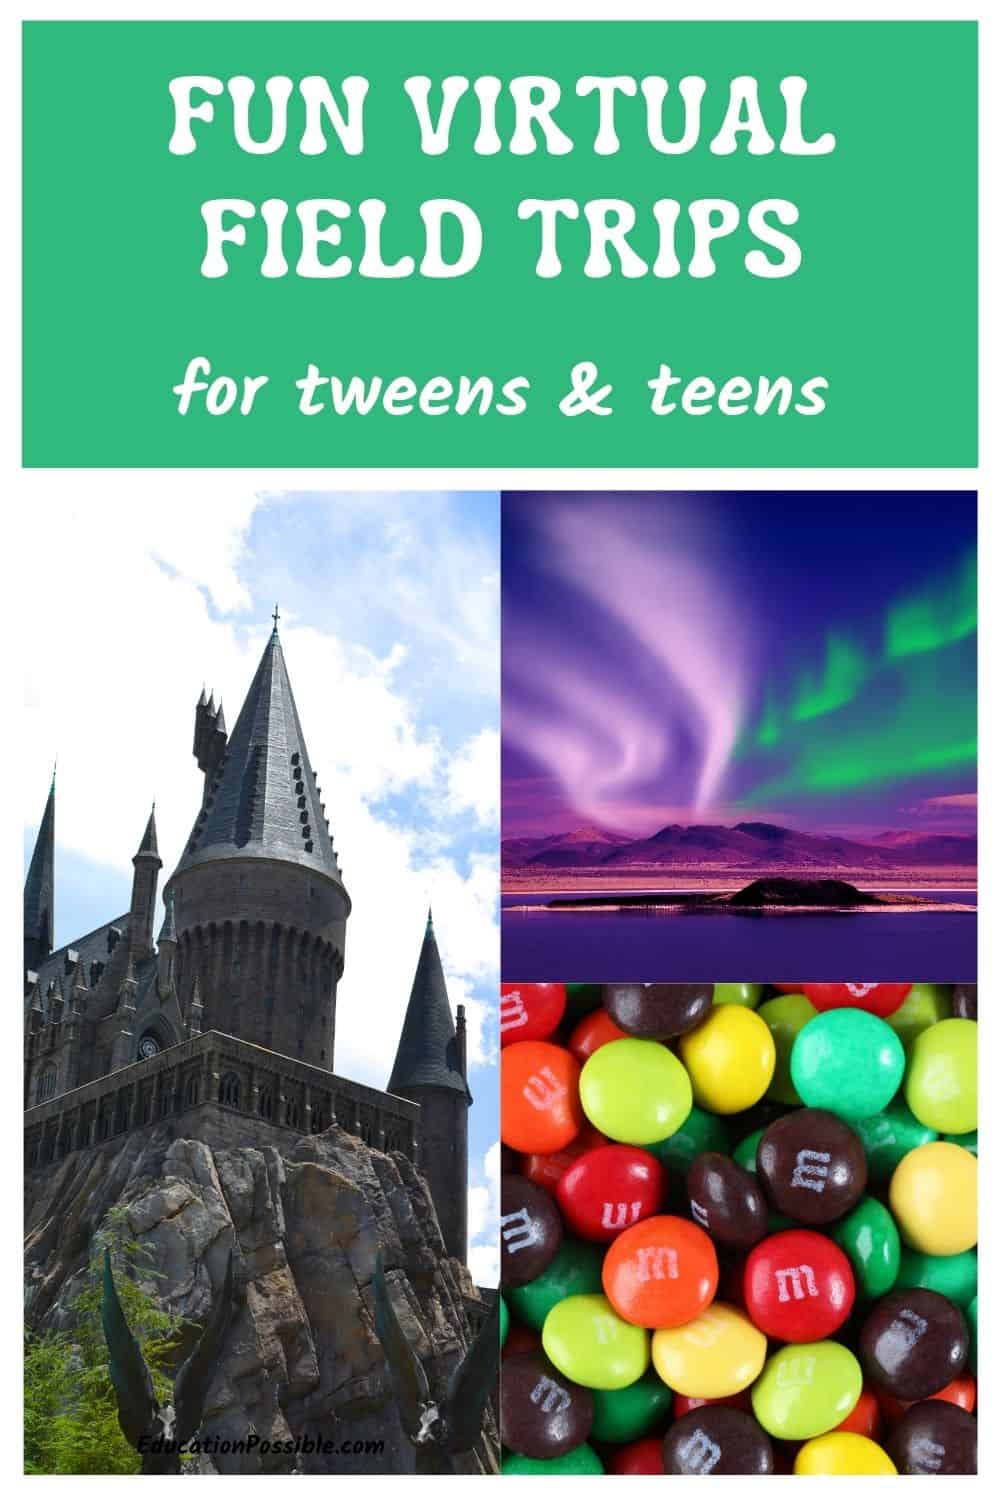 3 image collage - Hogwarts castle at Universal Orlando, northern lights, M&M candy